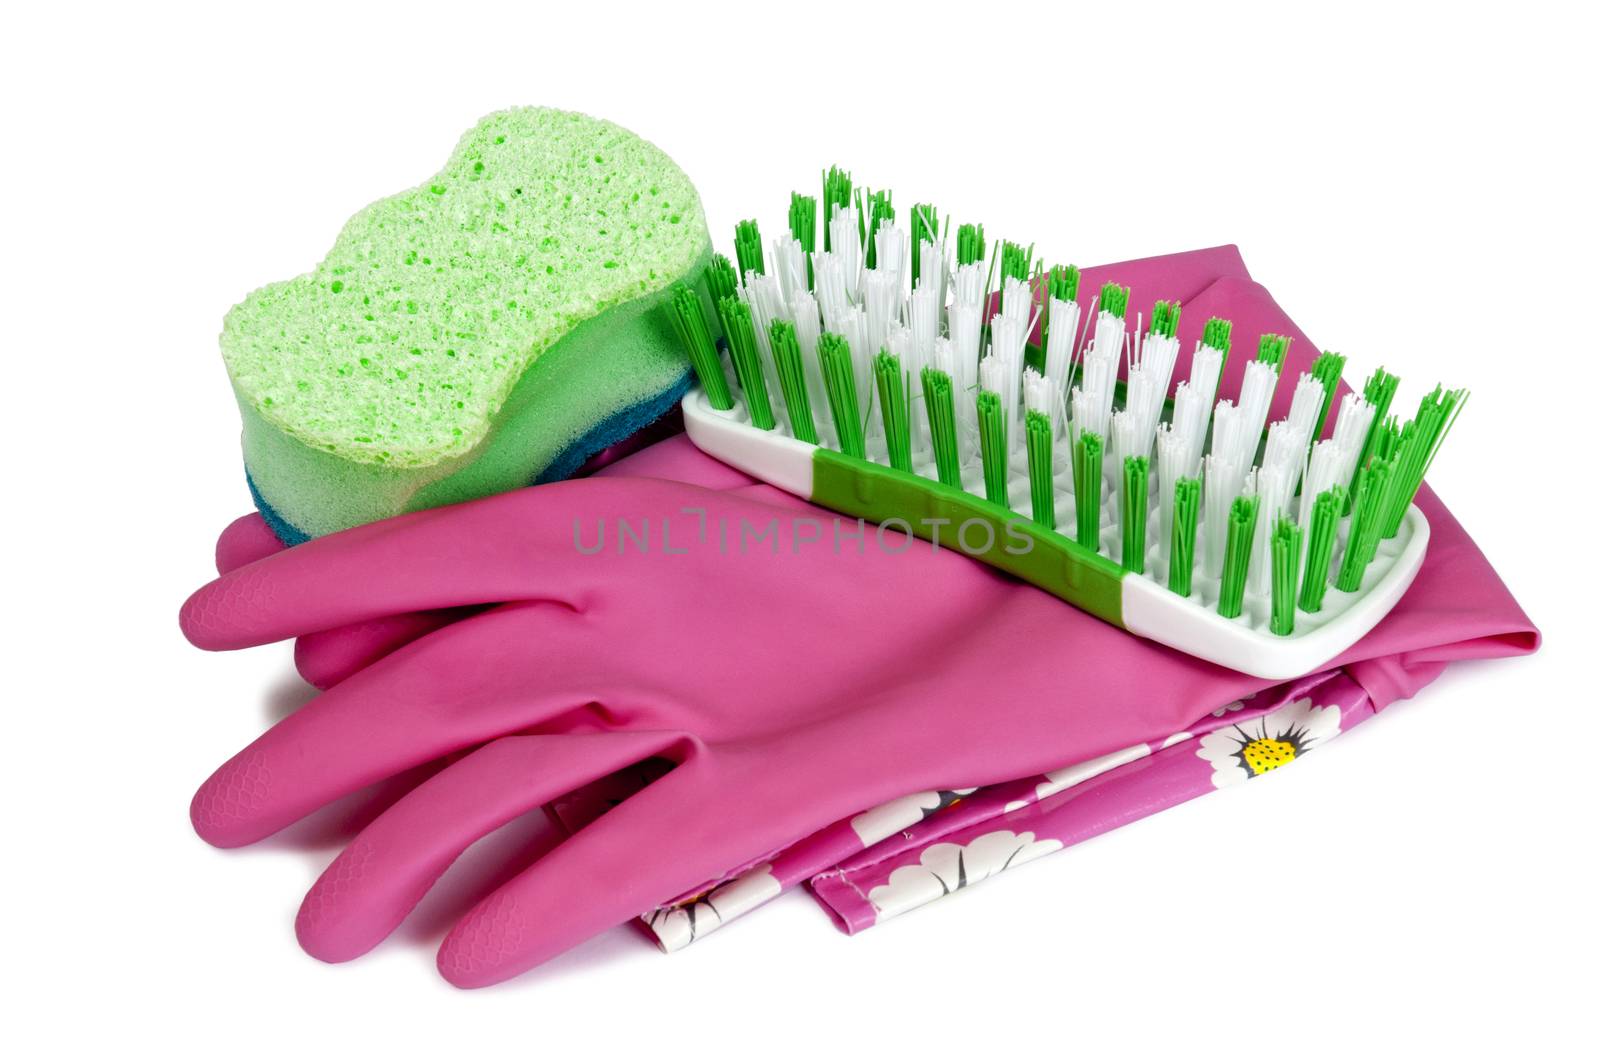 Rubber gloves with sponge and brush ready for cleaning the household